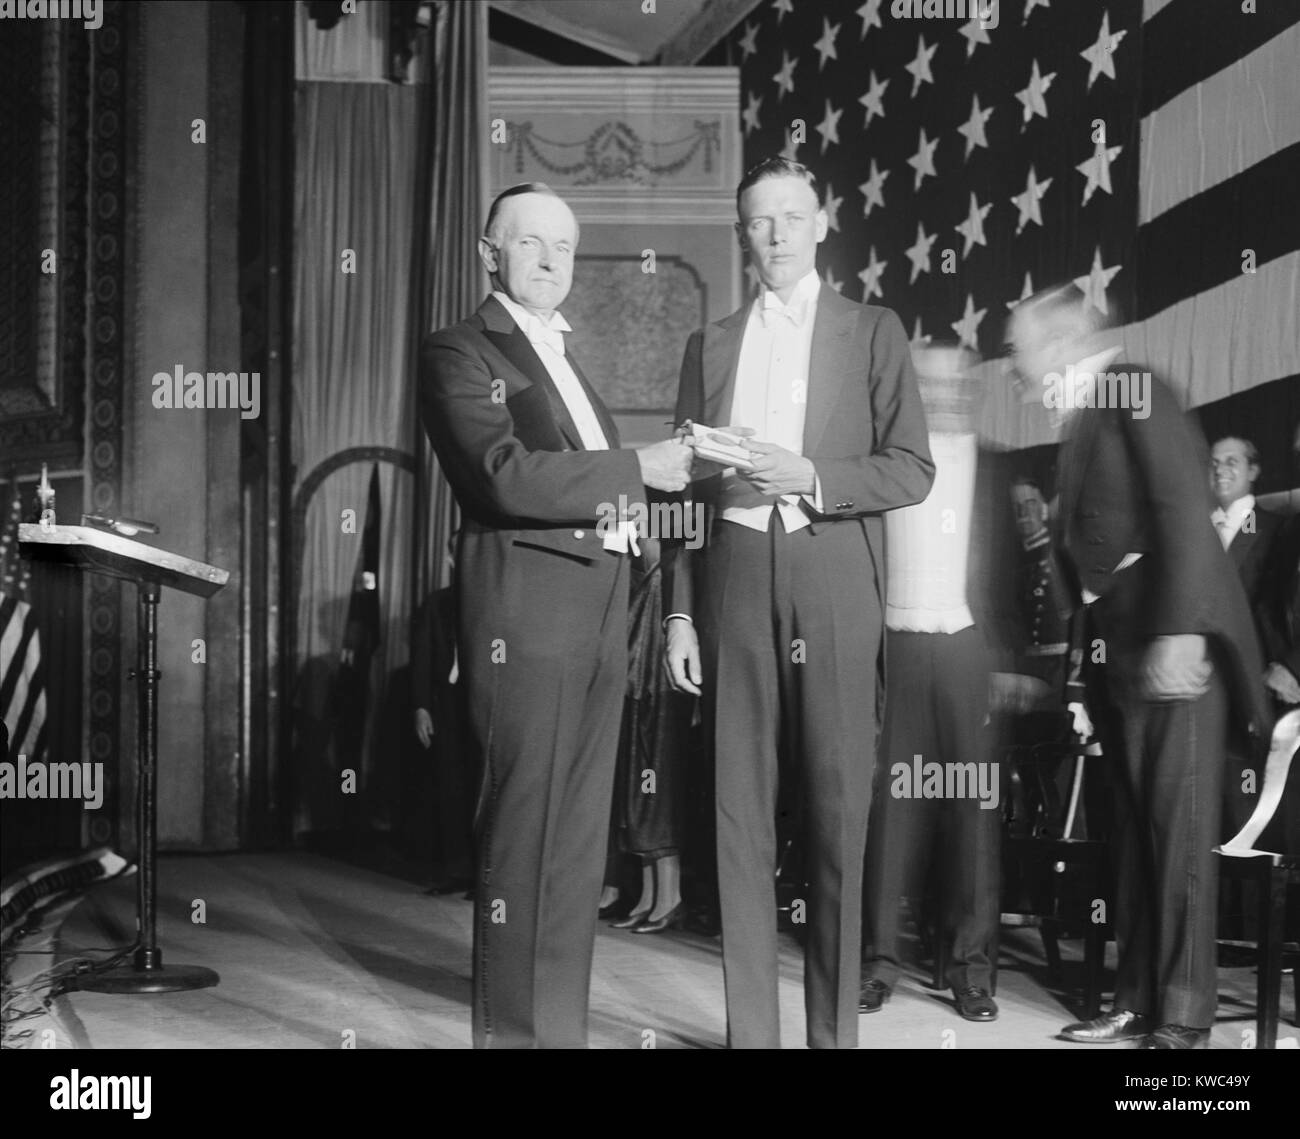 President Calvin Coolidge presents Charles Lindbergh with Congressional Medal of Honor. Nov. 1927. Lindbergh was a Captain in the U.S. Army Air Corps Reserve when he made his New York City to Paris flight on May 20-21, 1927. (BSLOC 2015 15 144) Stock Photo